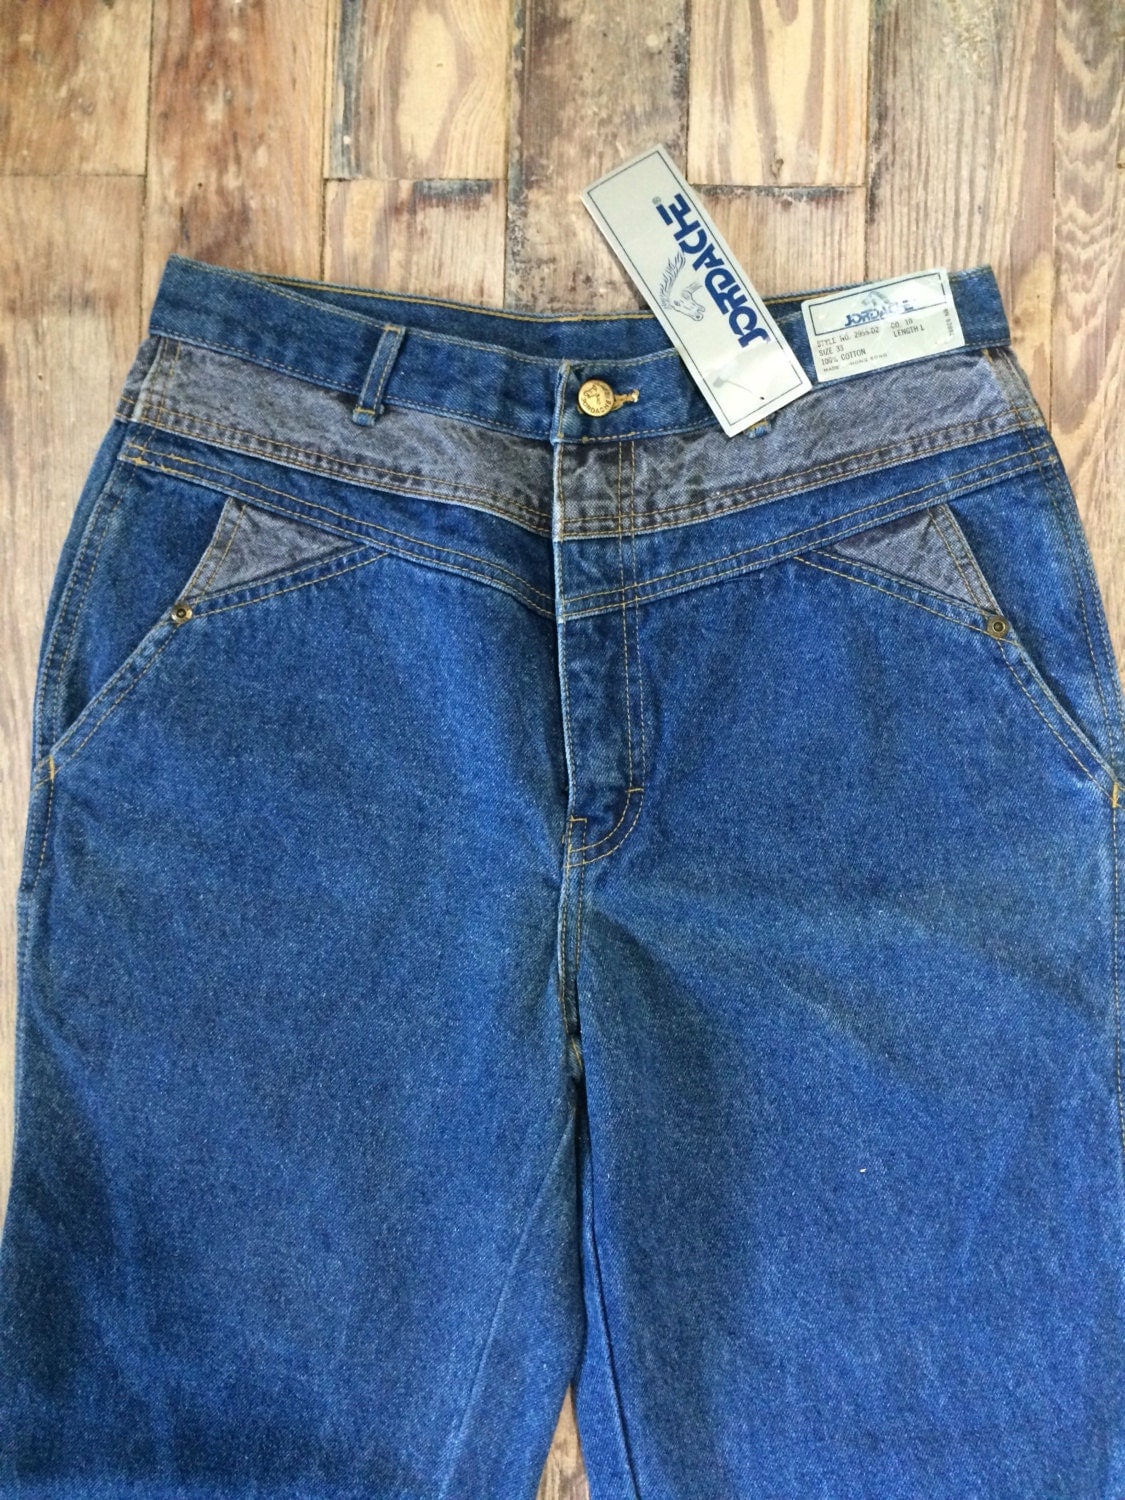 Vintage Jordache jeans with tags